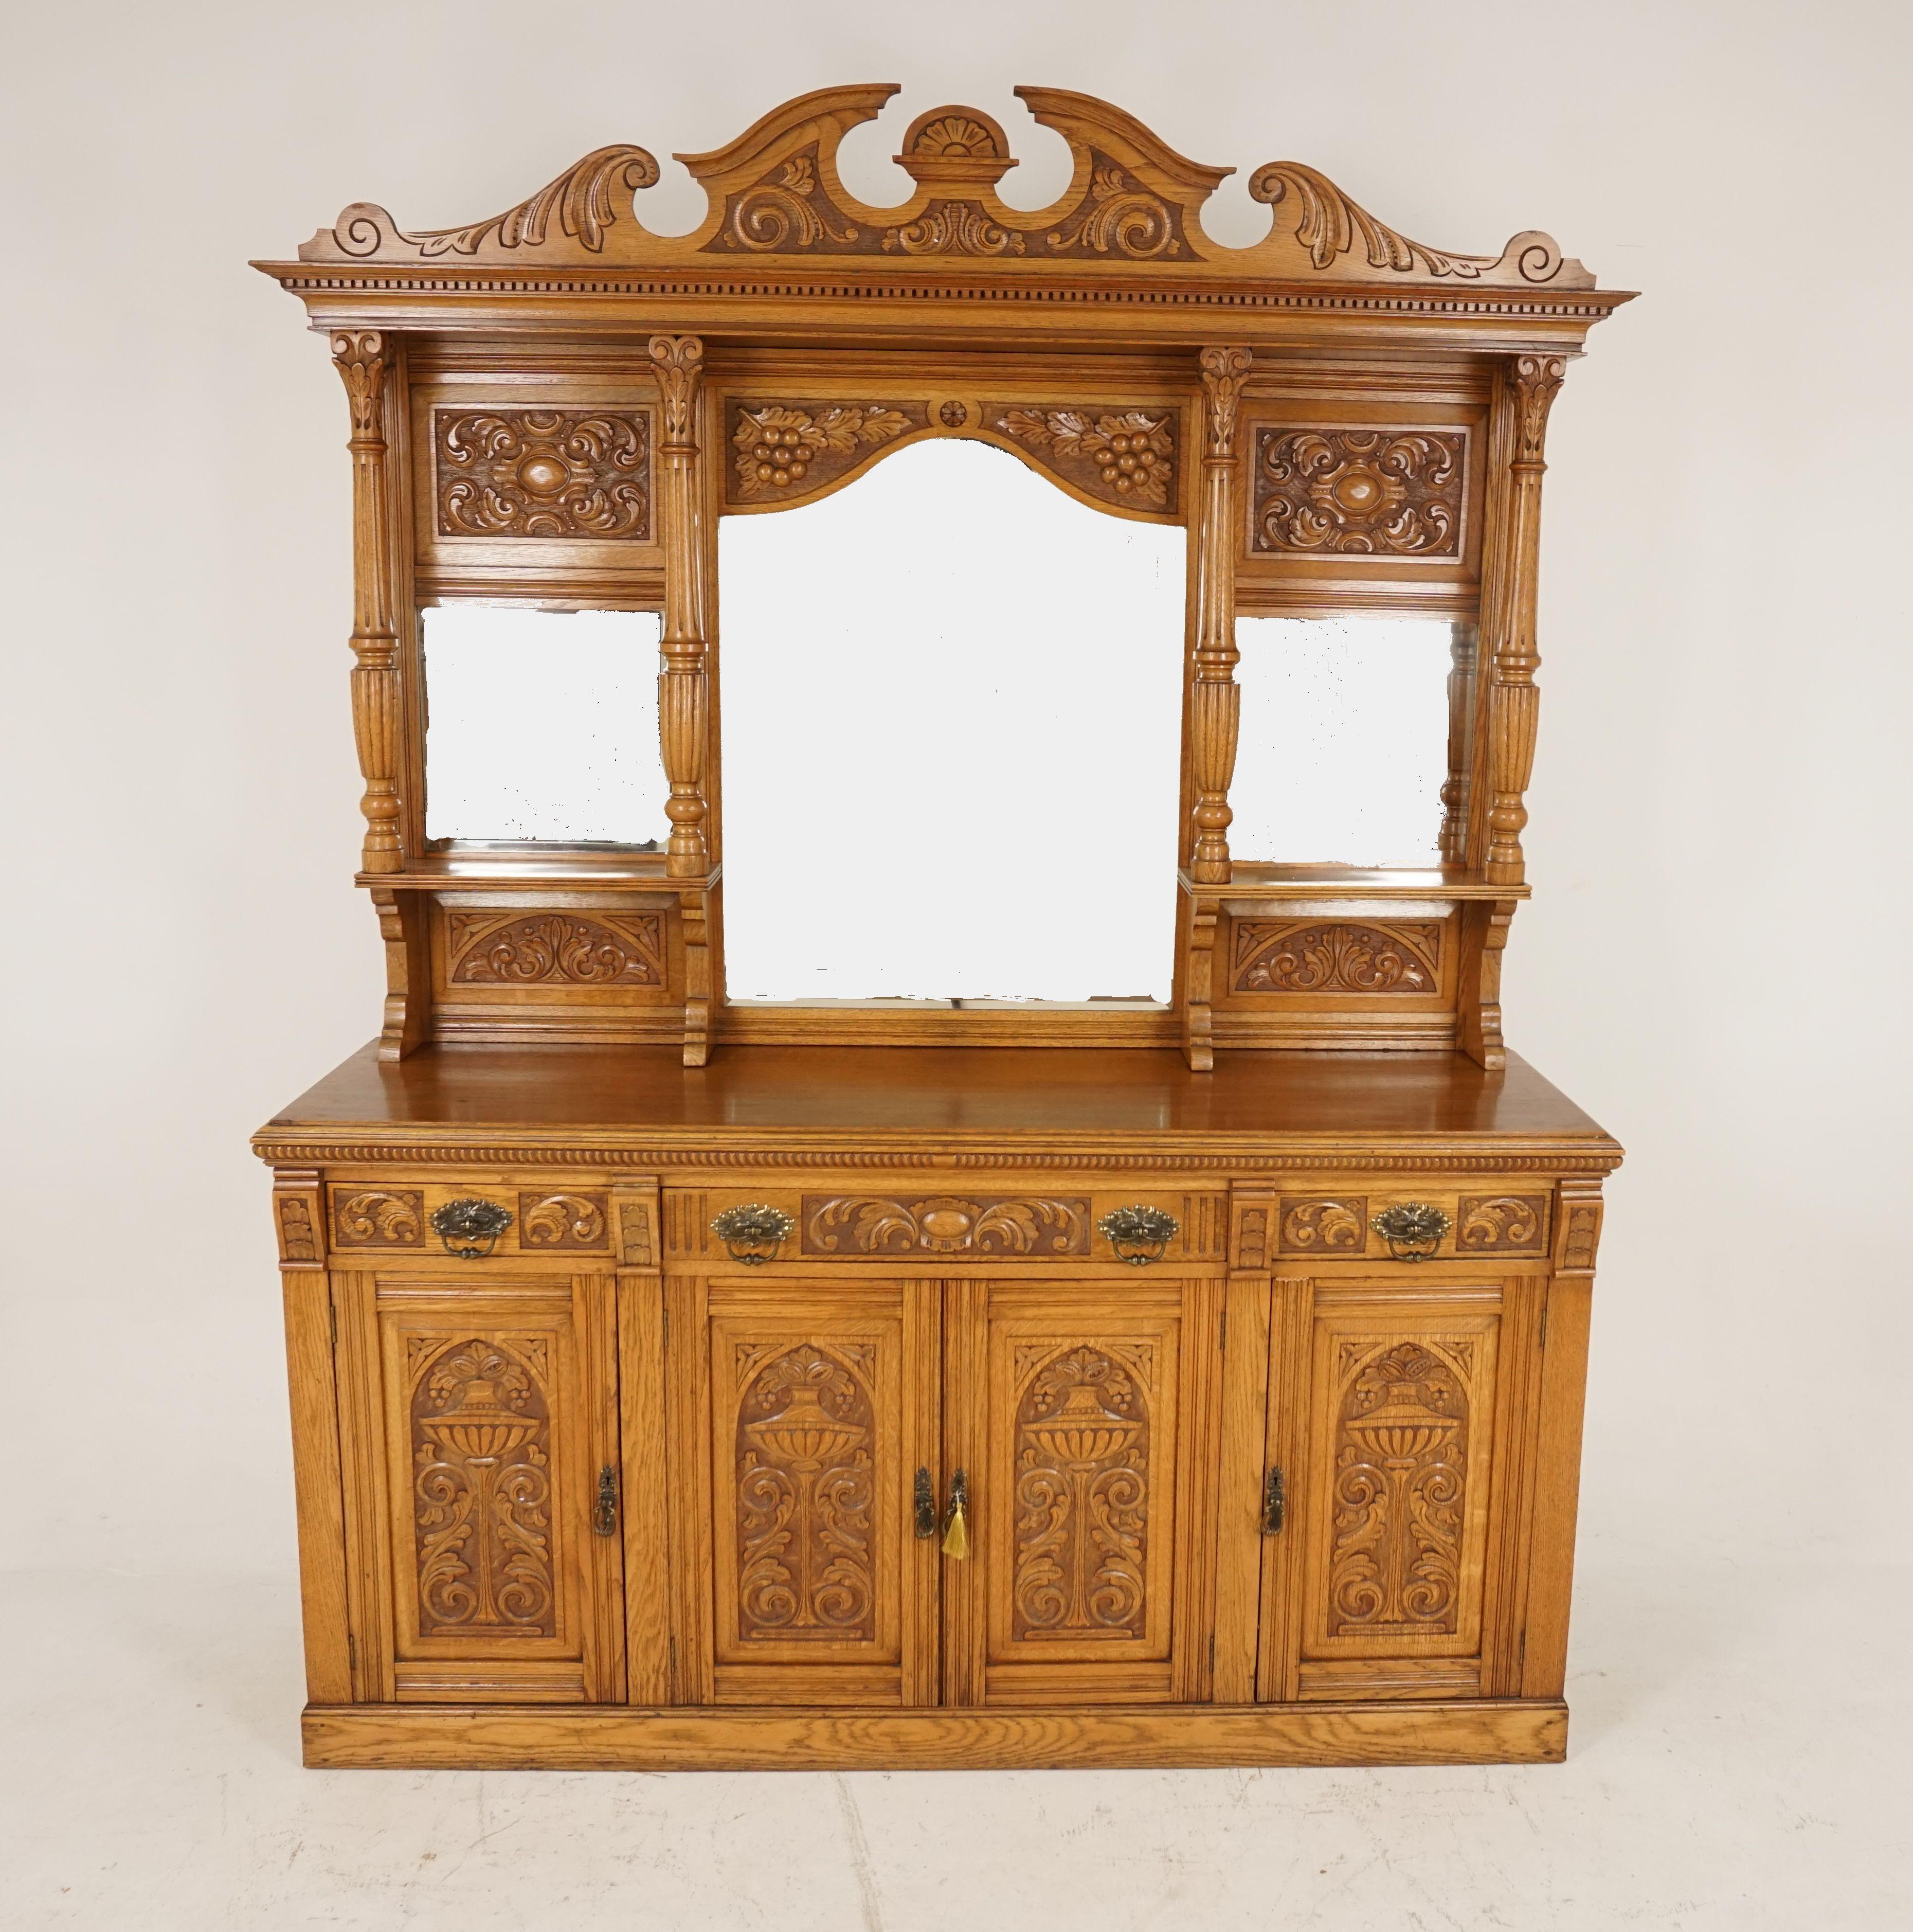 Antique Victorian sideboard, carved oak, mirror back buffet, Scotland 1890, H117

Scotland 1890
Solid oak
Original finish
Ornate carved removable pediment on top
Dented cornice below
Central shaped beveled mirror underneath
Flanked by a pair of